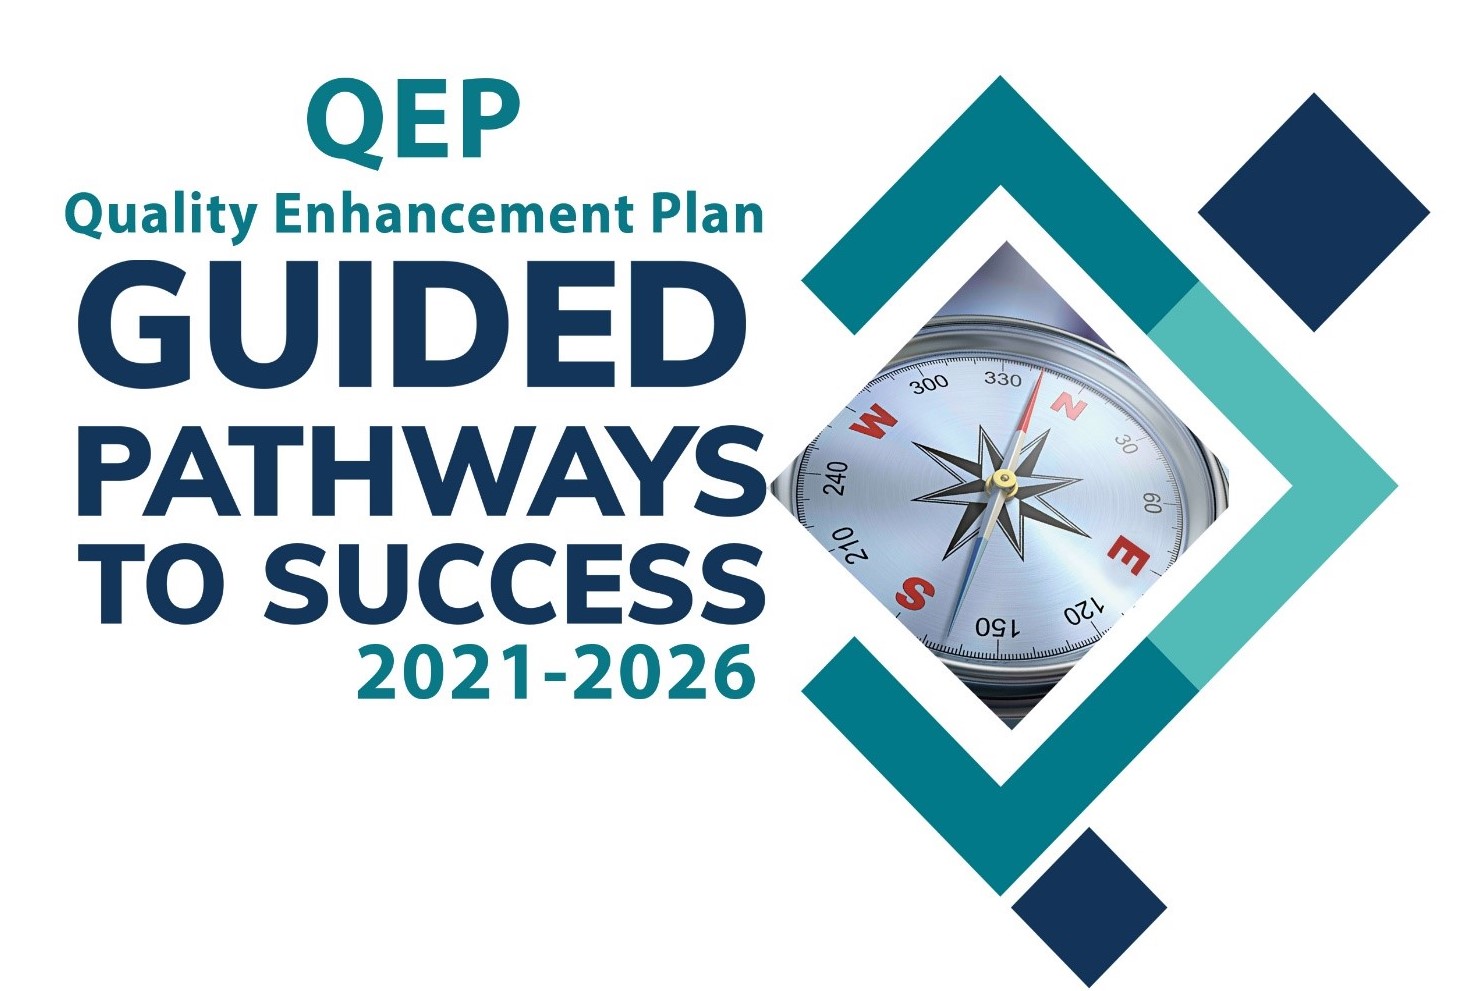 QEP Quality Enhancement Plan - Guided Pathways to Success 2021-2026